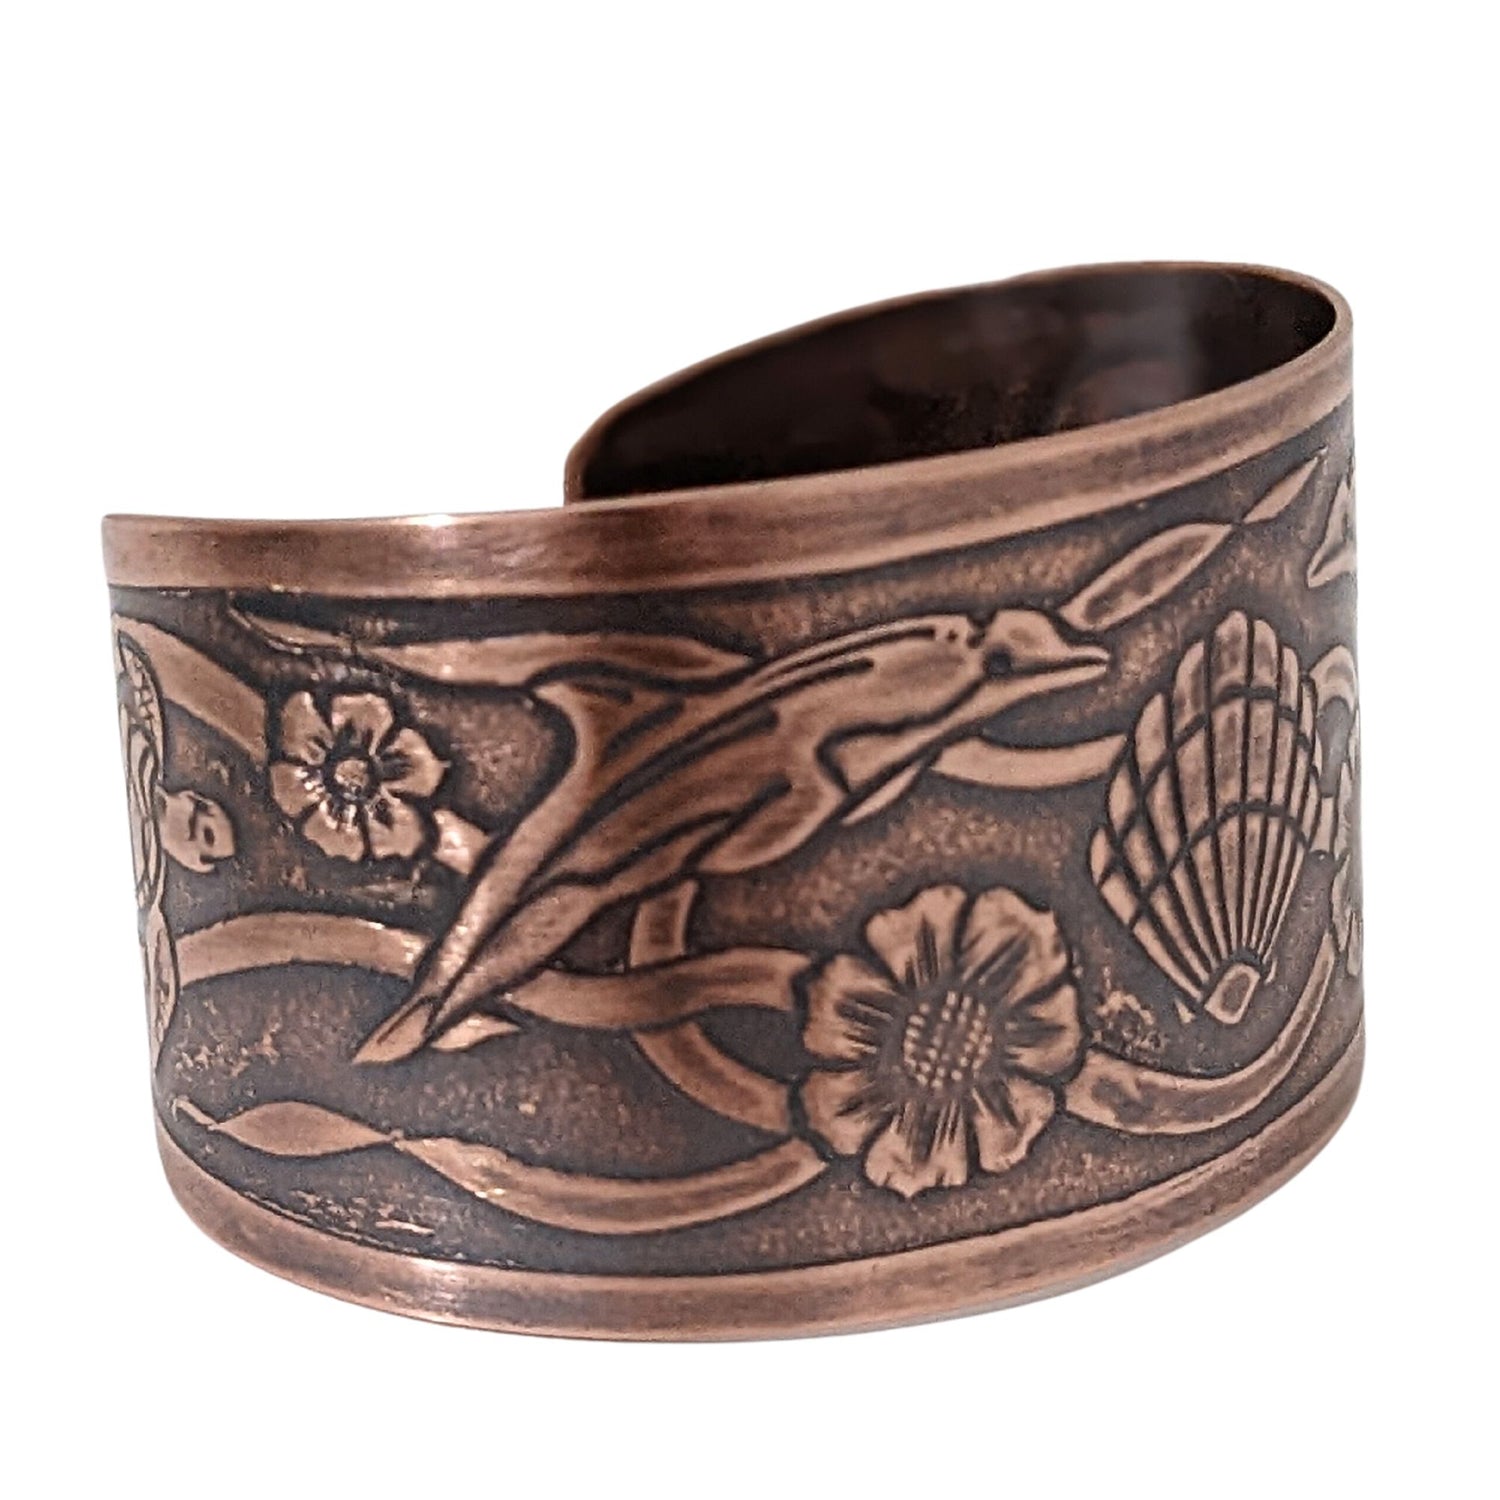 Wide tapered copper cuff bracelet with sea life design. Center is a seashell, with flowers and dolphins on either side.  Toward the ends of the cuff there are turtles, and a seaweed pattern is woven throughout the design.